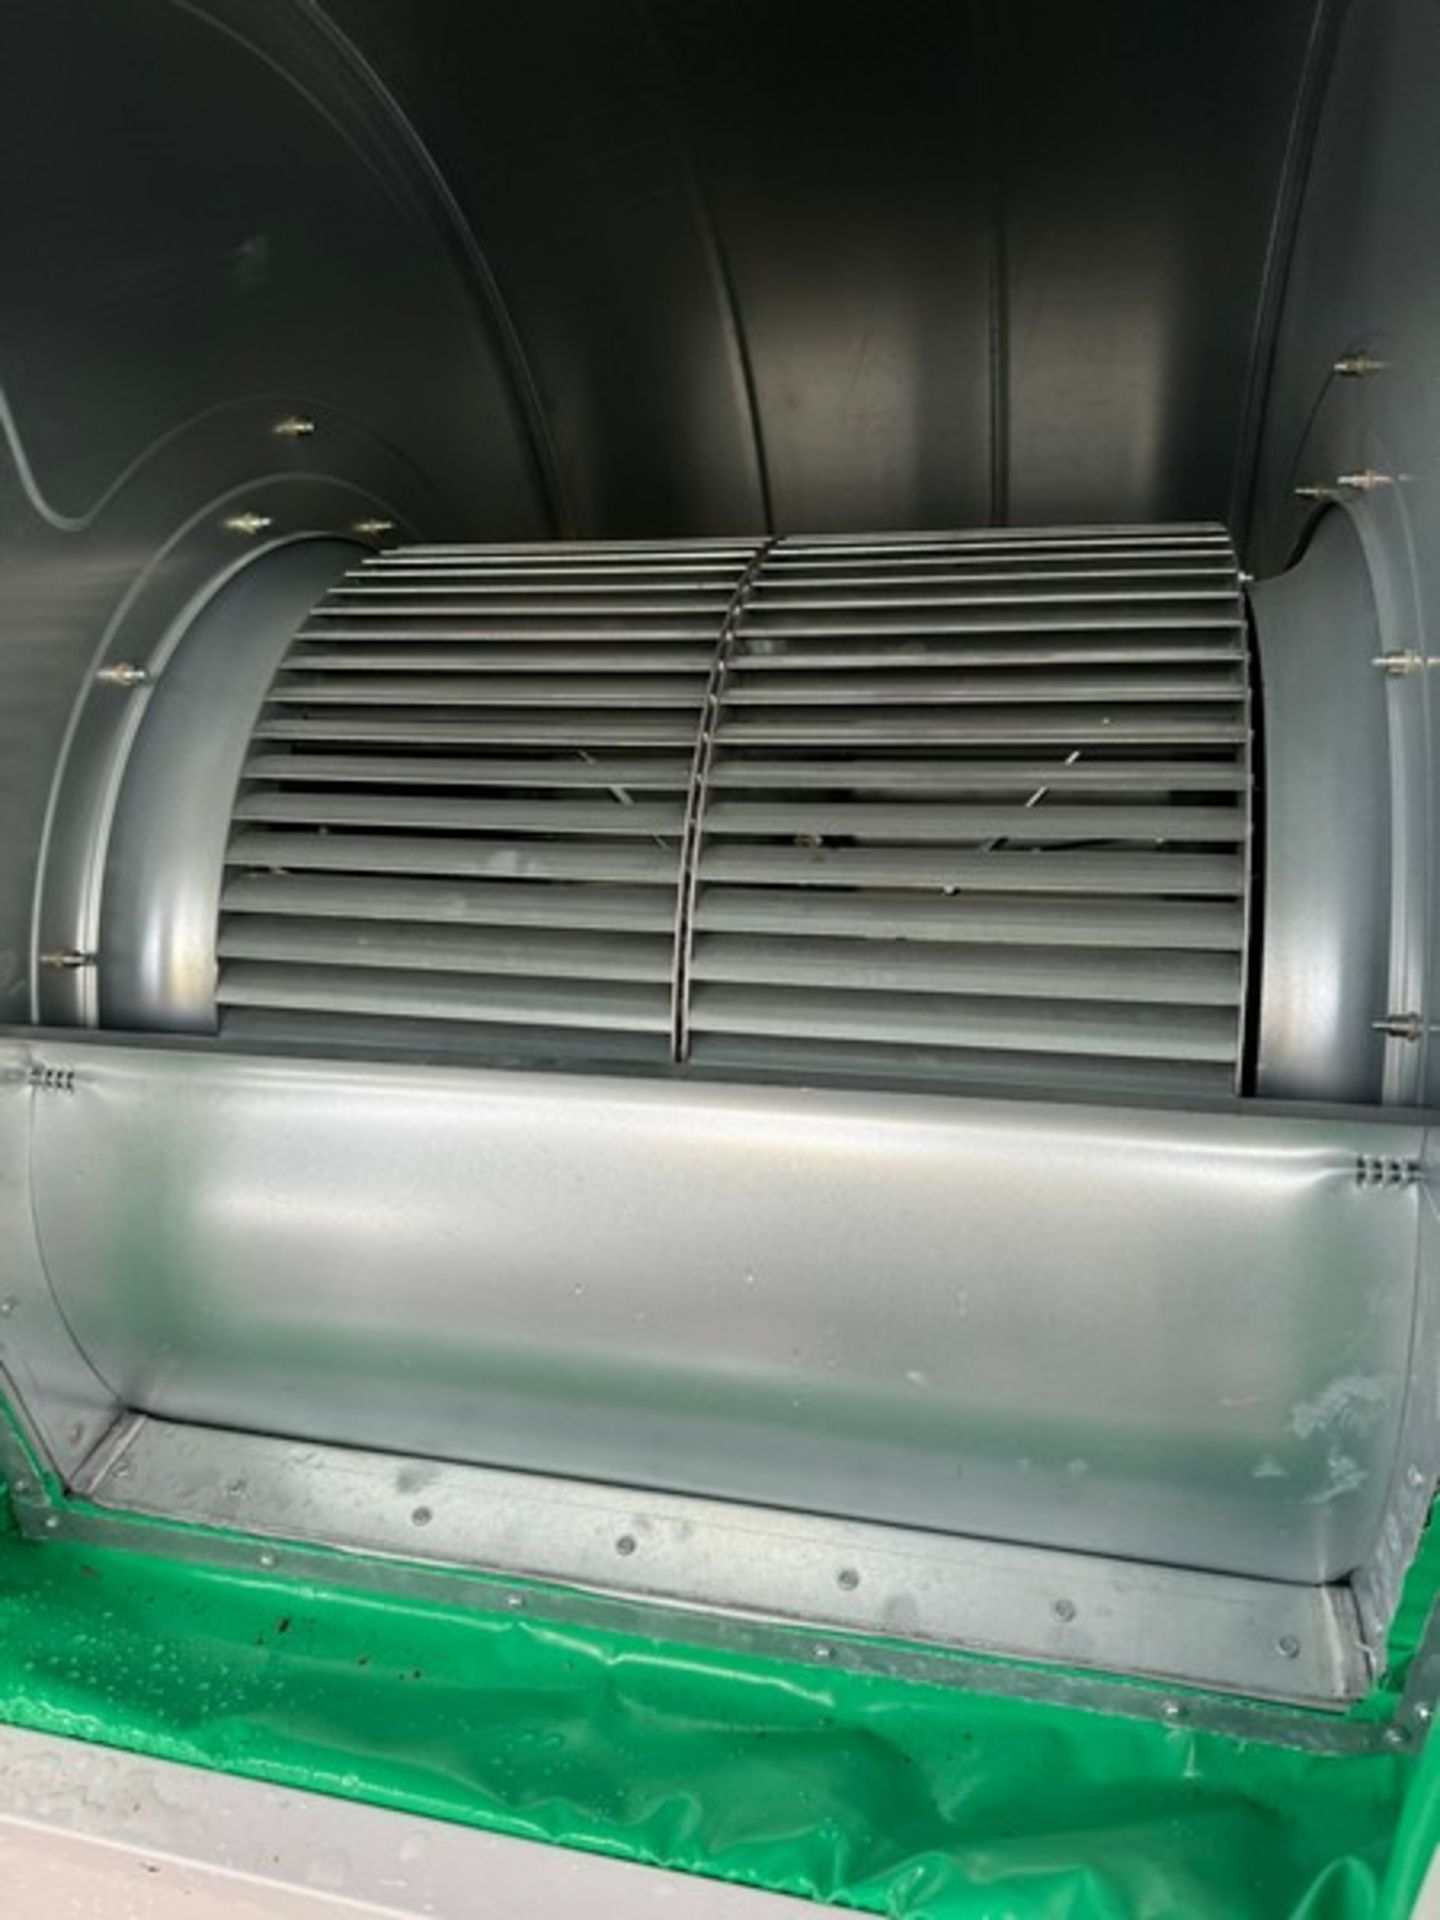 NEW 2022 SHENHLIN Roof Mounted Air Cooled Package Unit, S/N C5020221018R002, Cooling Capacity: 140.2 - Image 15 of 17